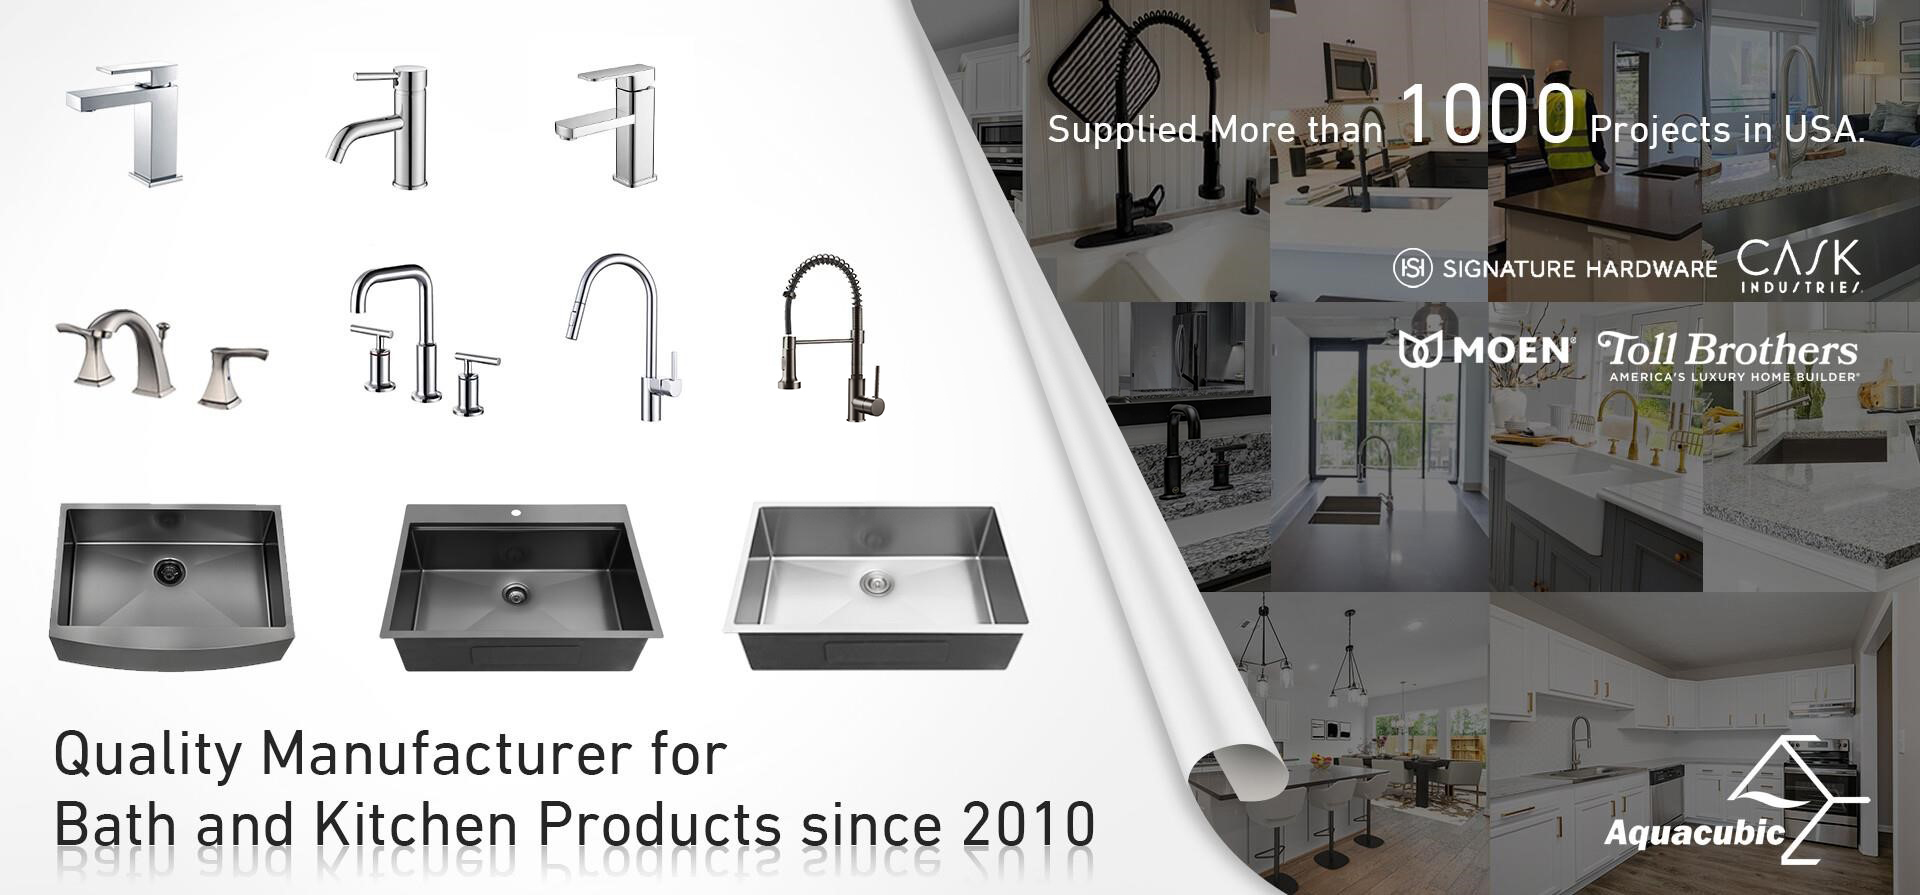 Lead-free Induction Modern Wallmount Faucet